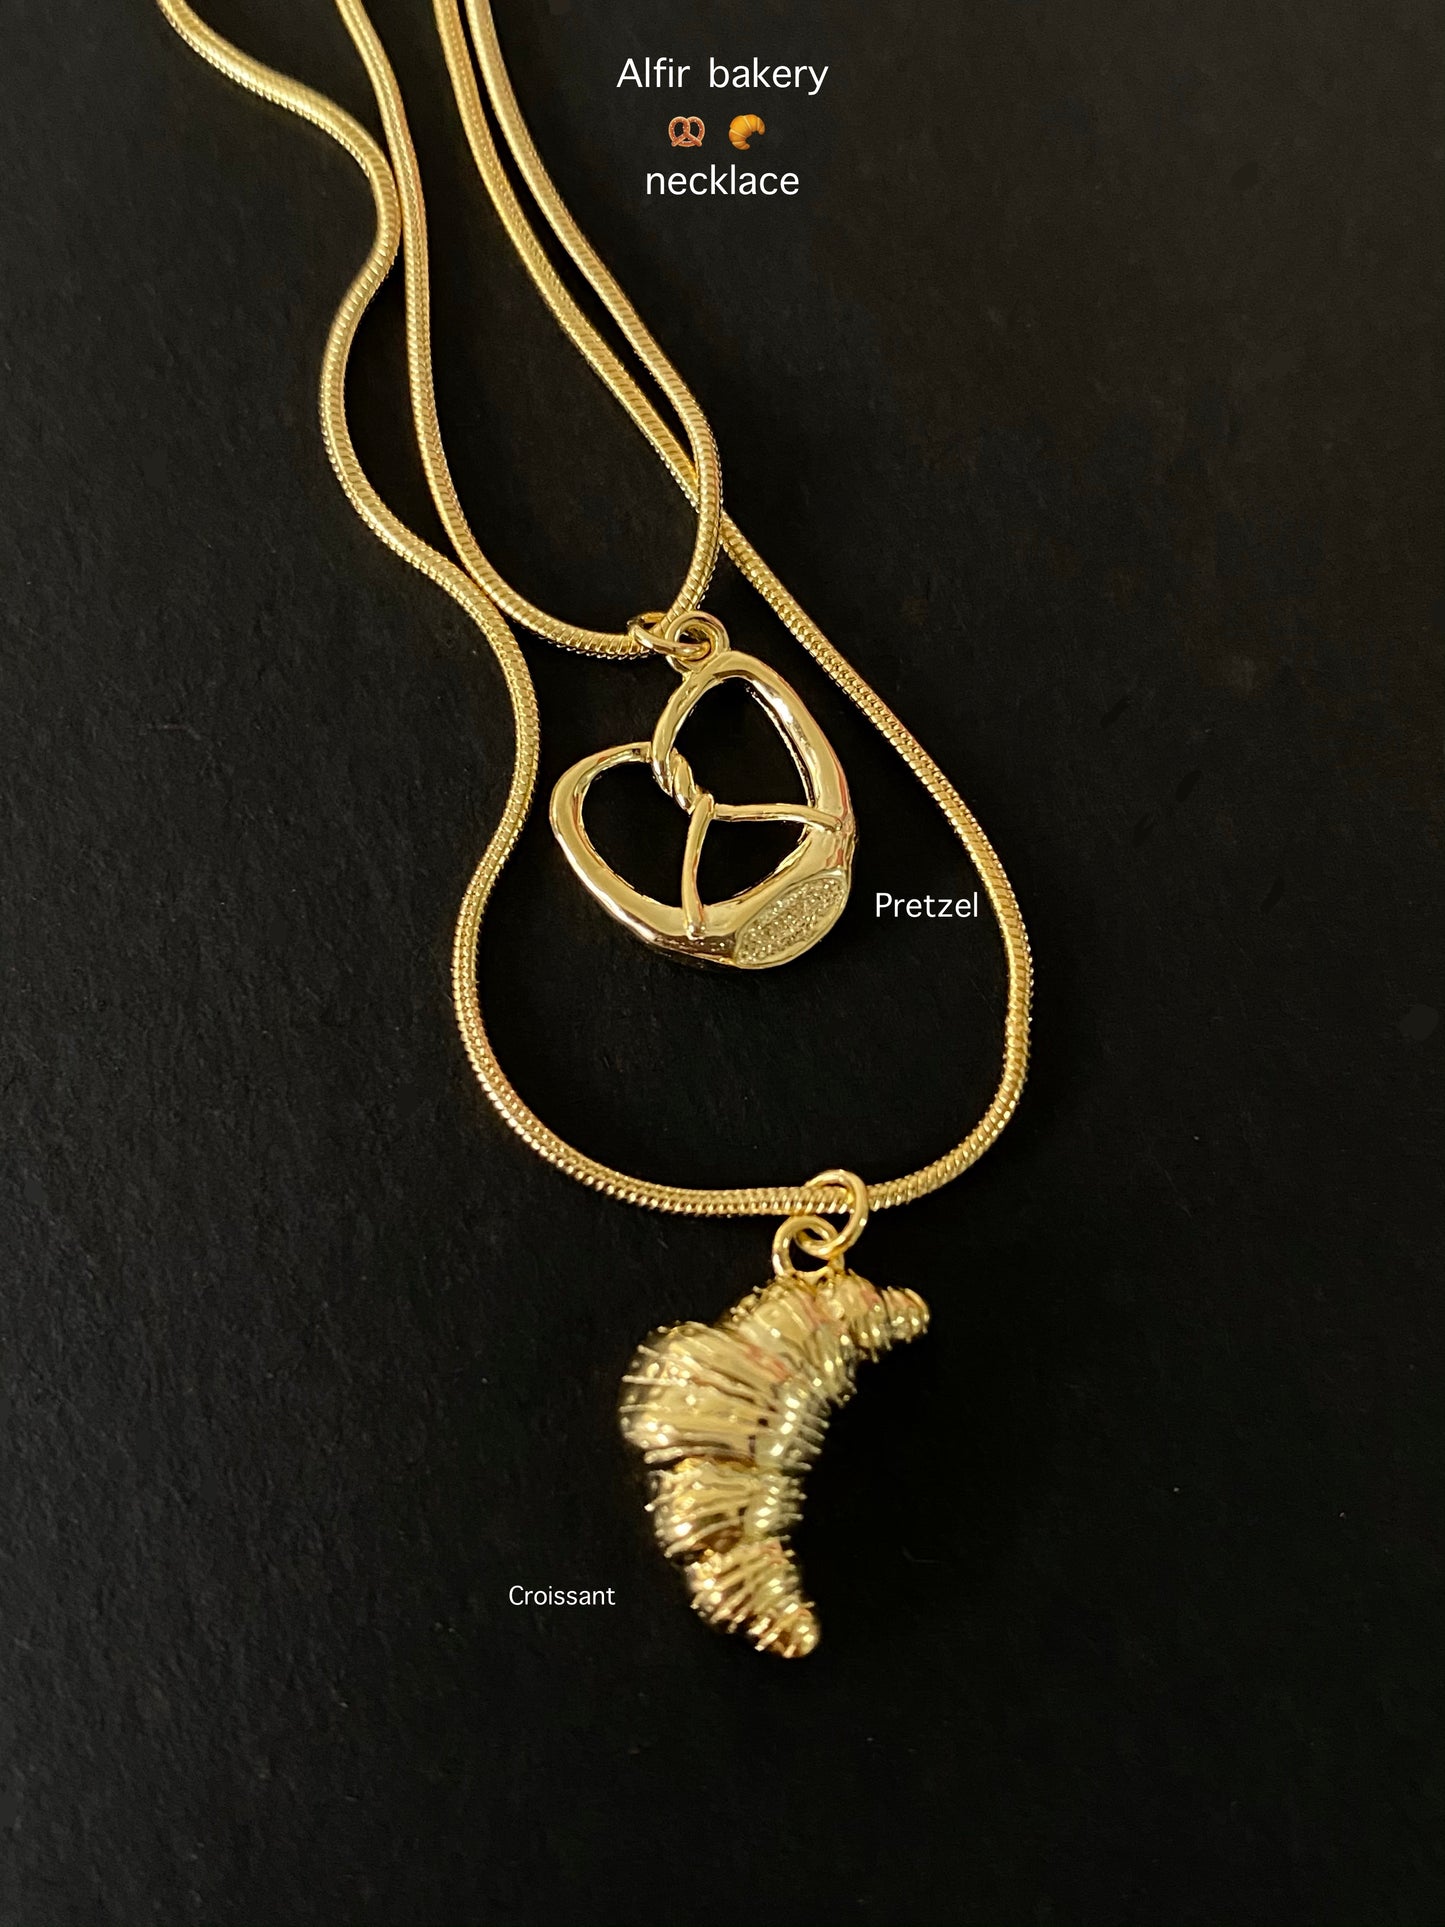 Gold Croissant Necklace - Quirky Bakery Collection by AlfirDesign